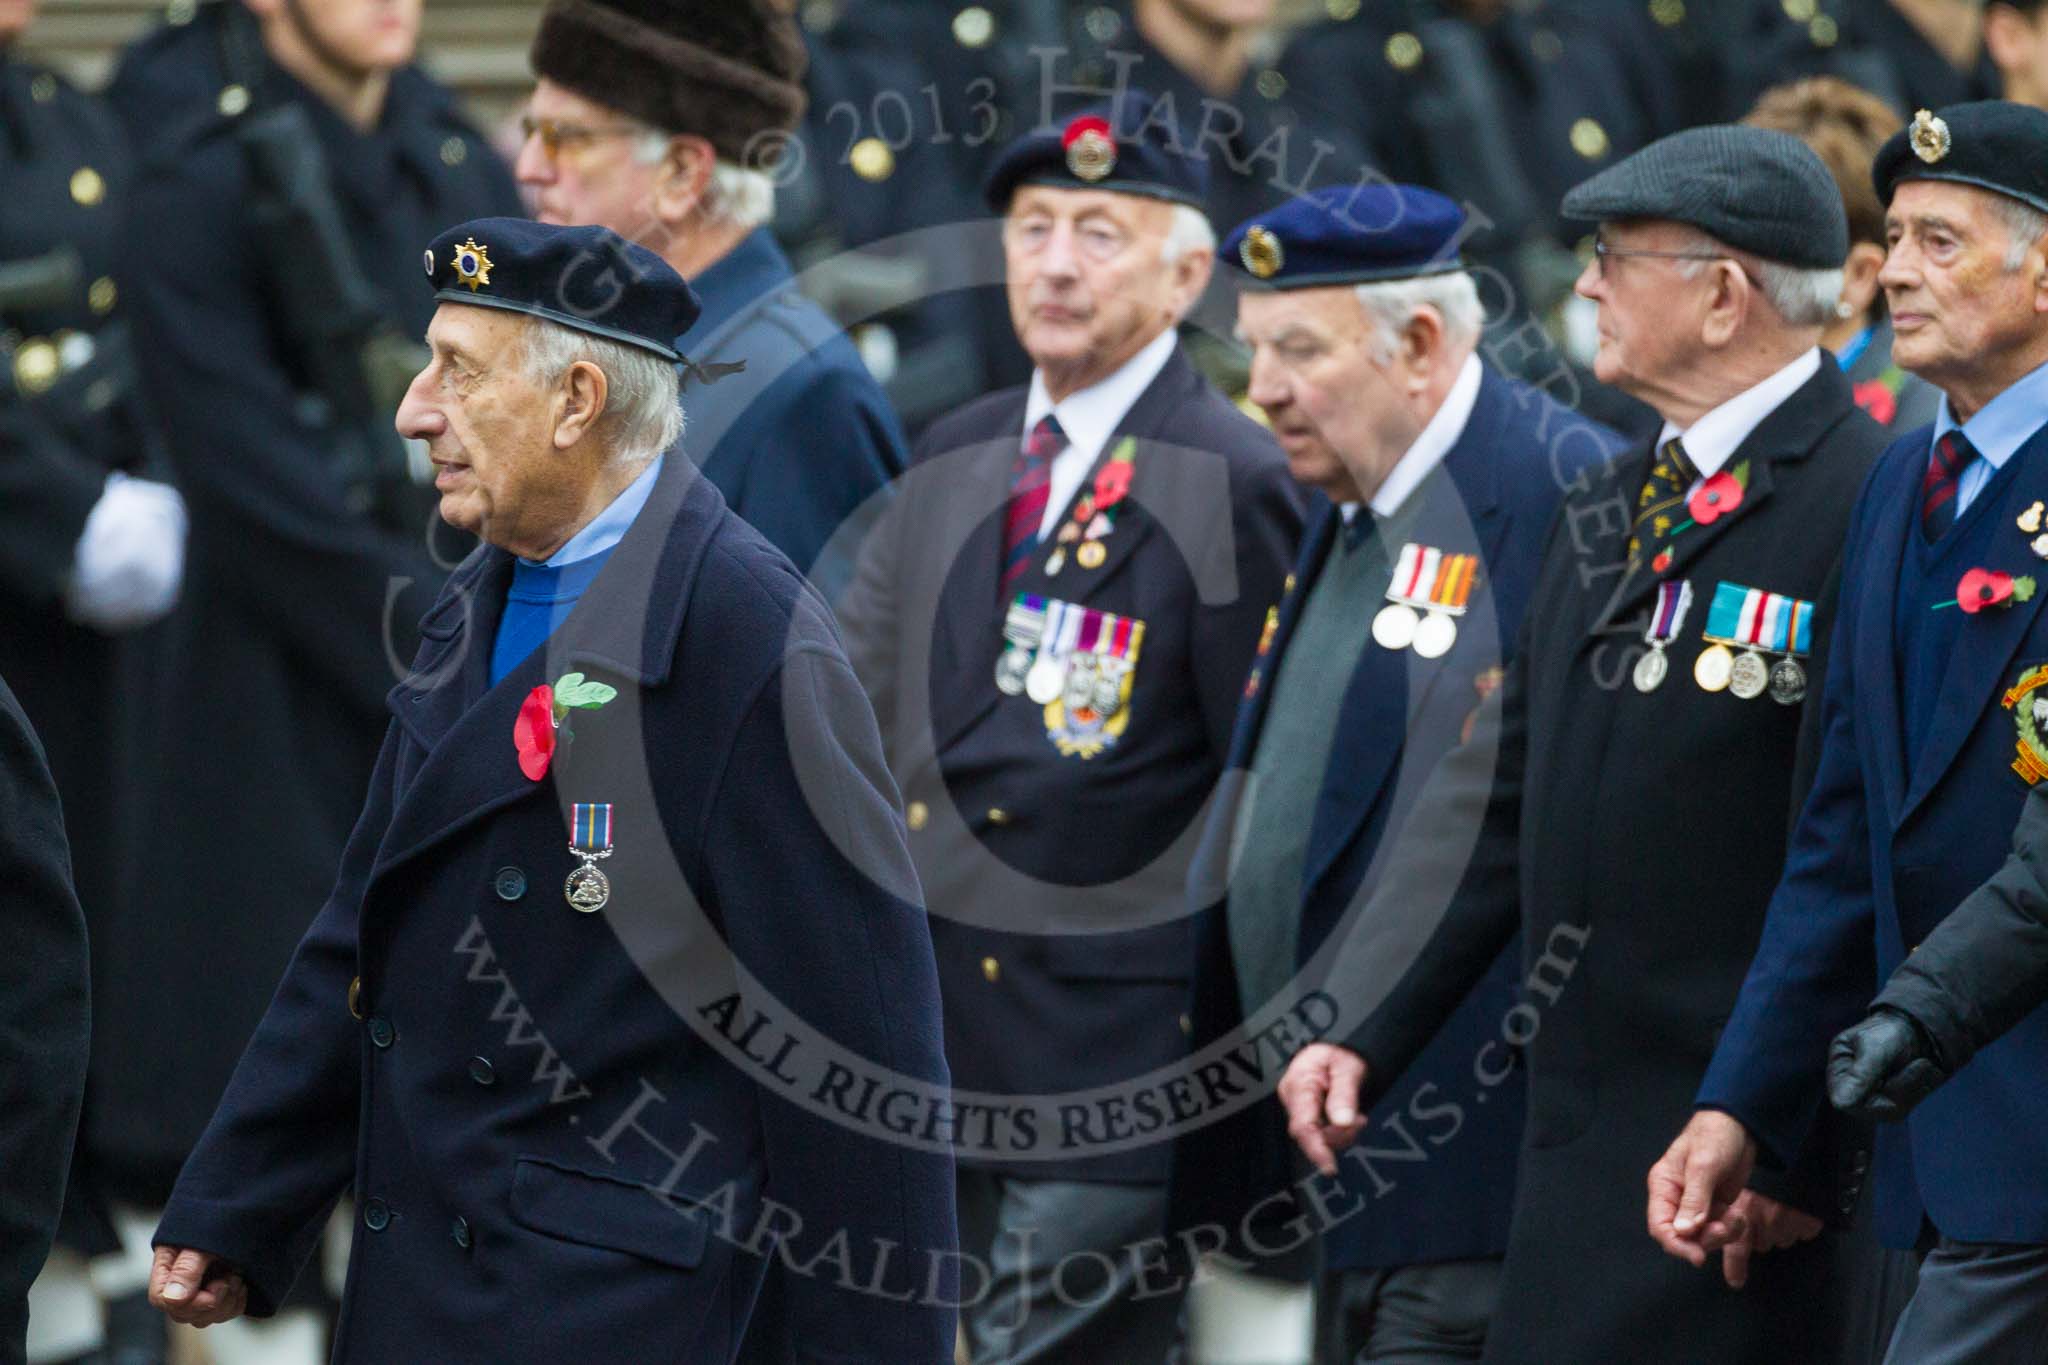 Remembrance Sunday at the Cenotaph 2015: Group D13, Association of Jewish Ex-Servicemen & Women.
Cenotaph, Whitehall, London SW1,
London,
Greater London,
United Kingdom,
on 08 November 2015 at 11:53, image #651